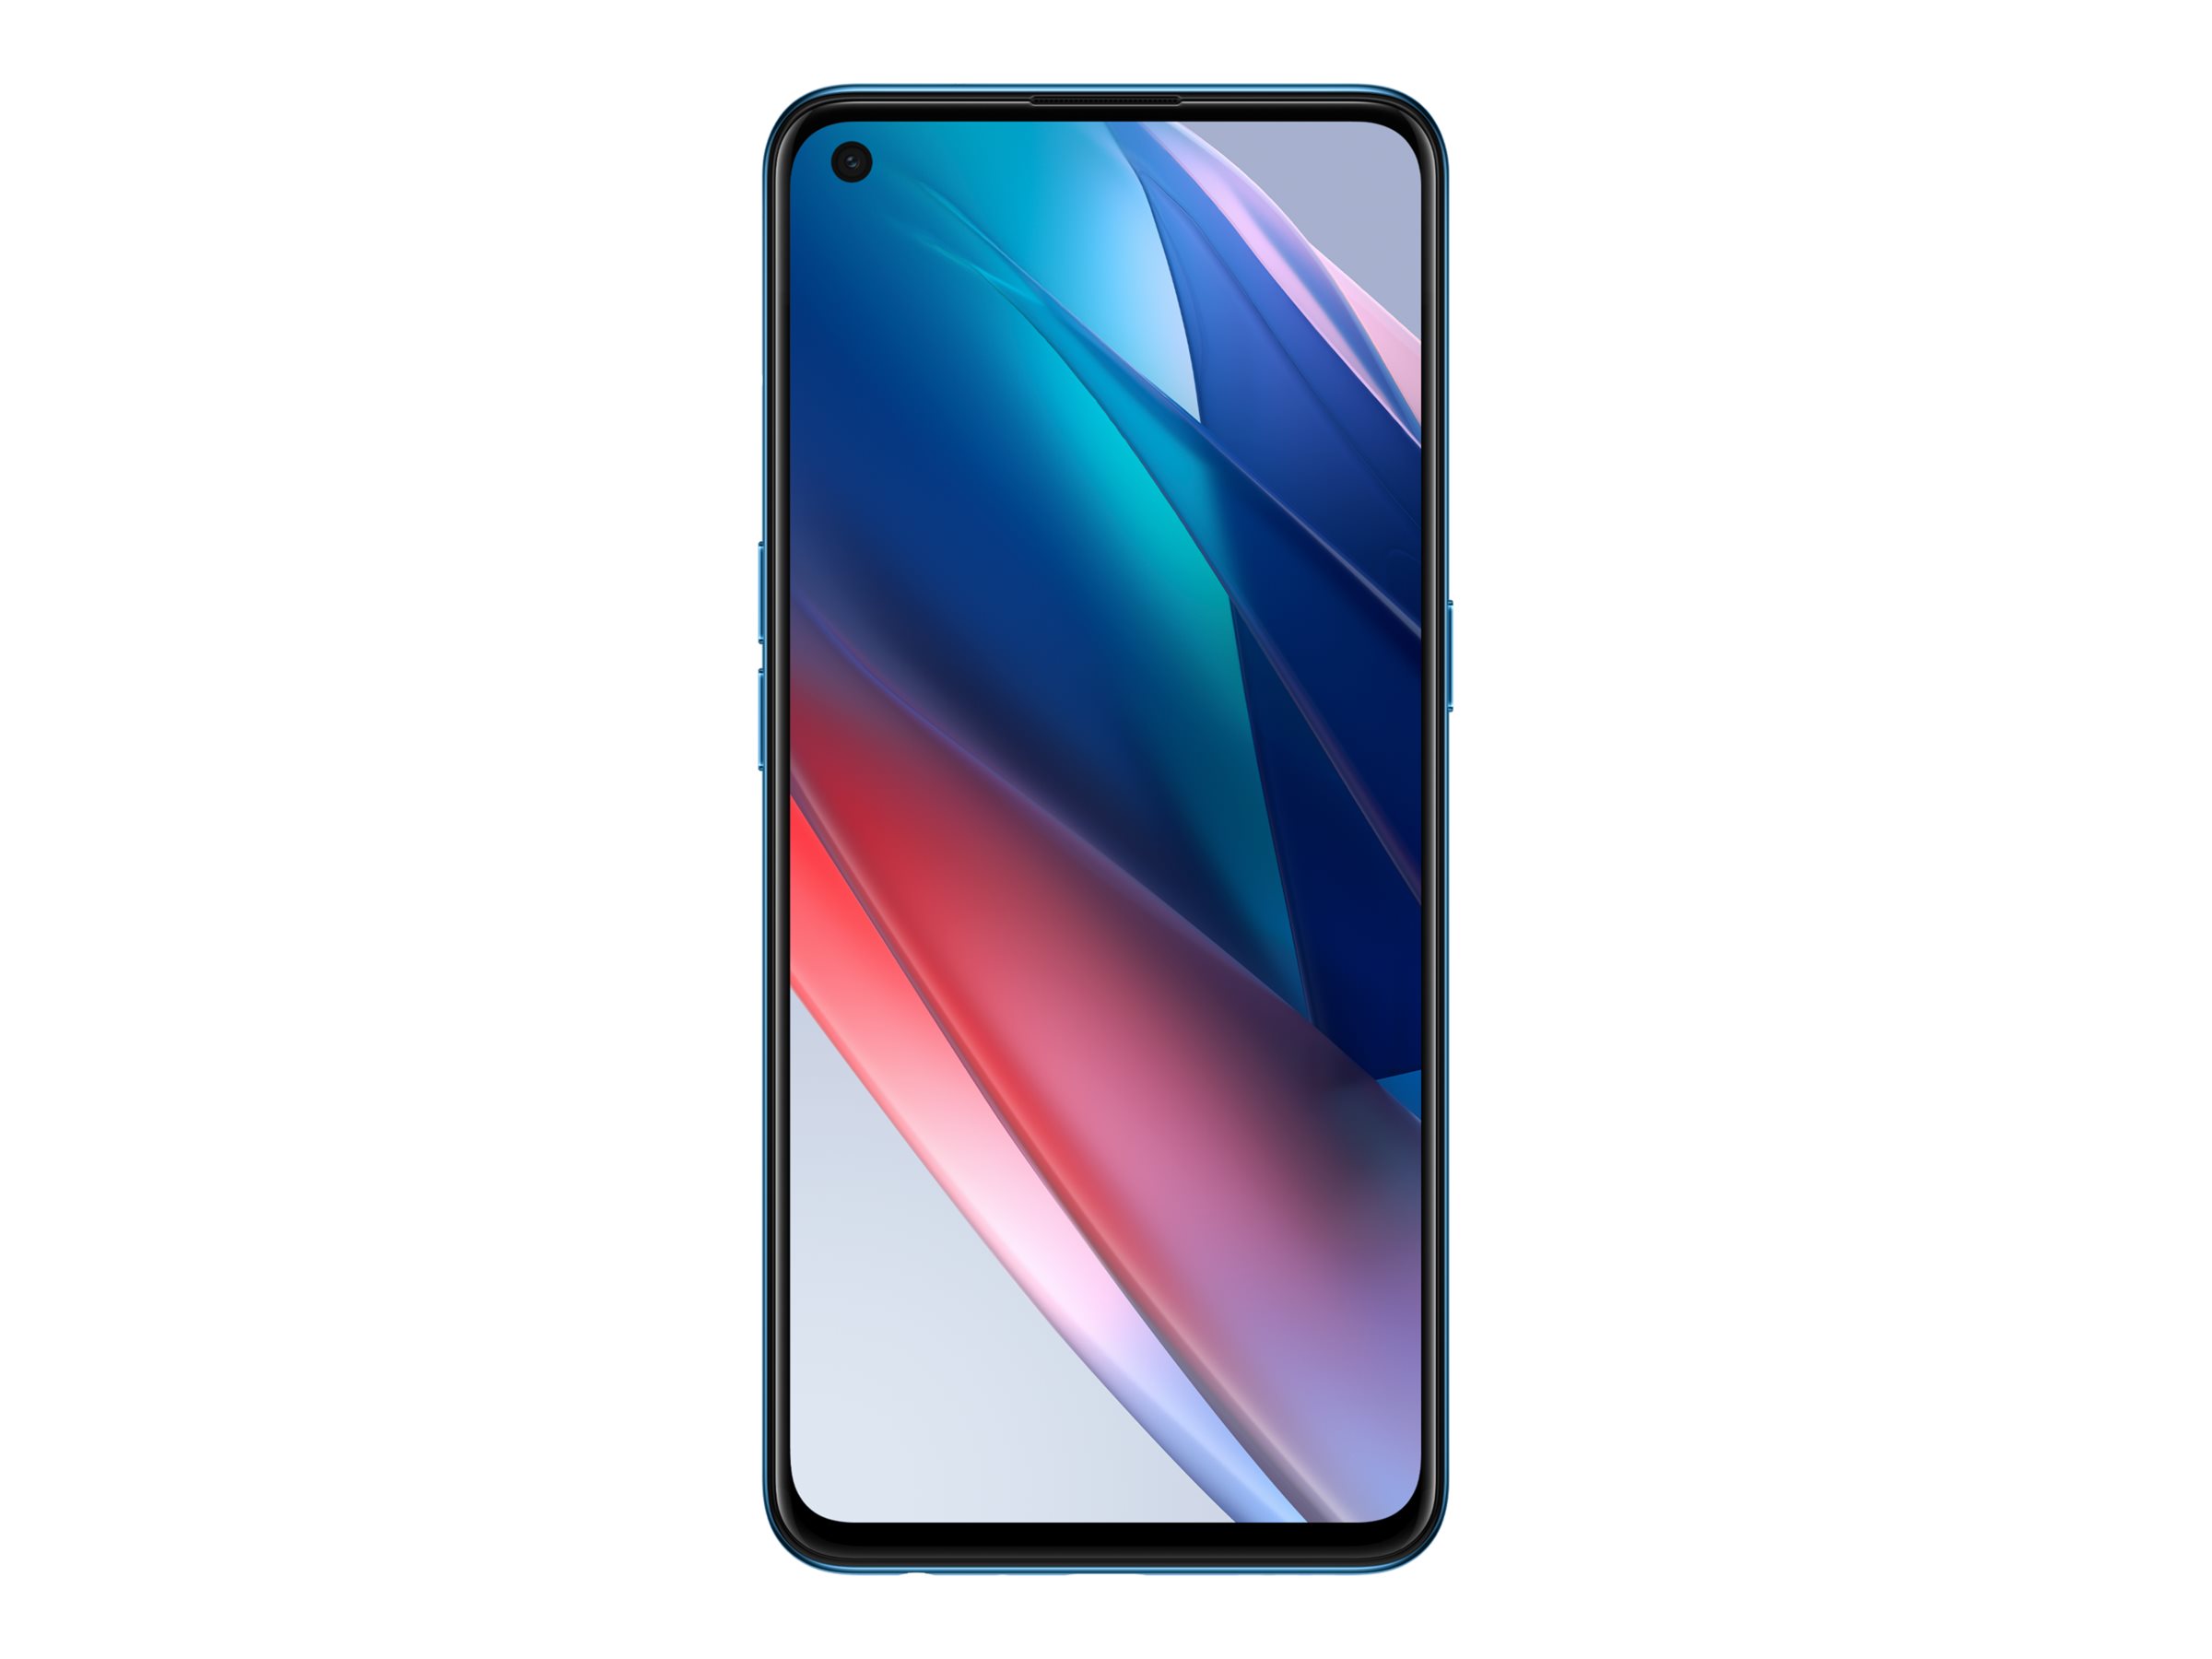 Oppo Find X3 Neo 5G Dual Sim - Fone Central